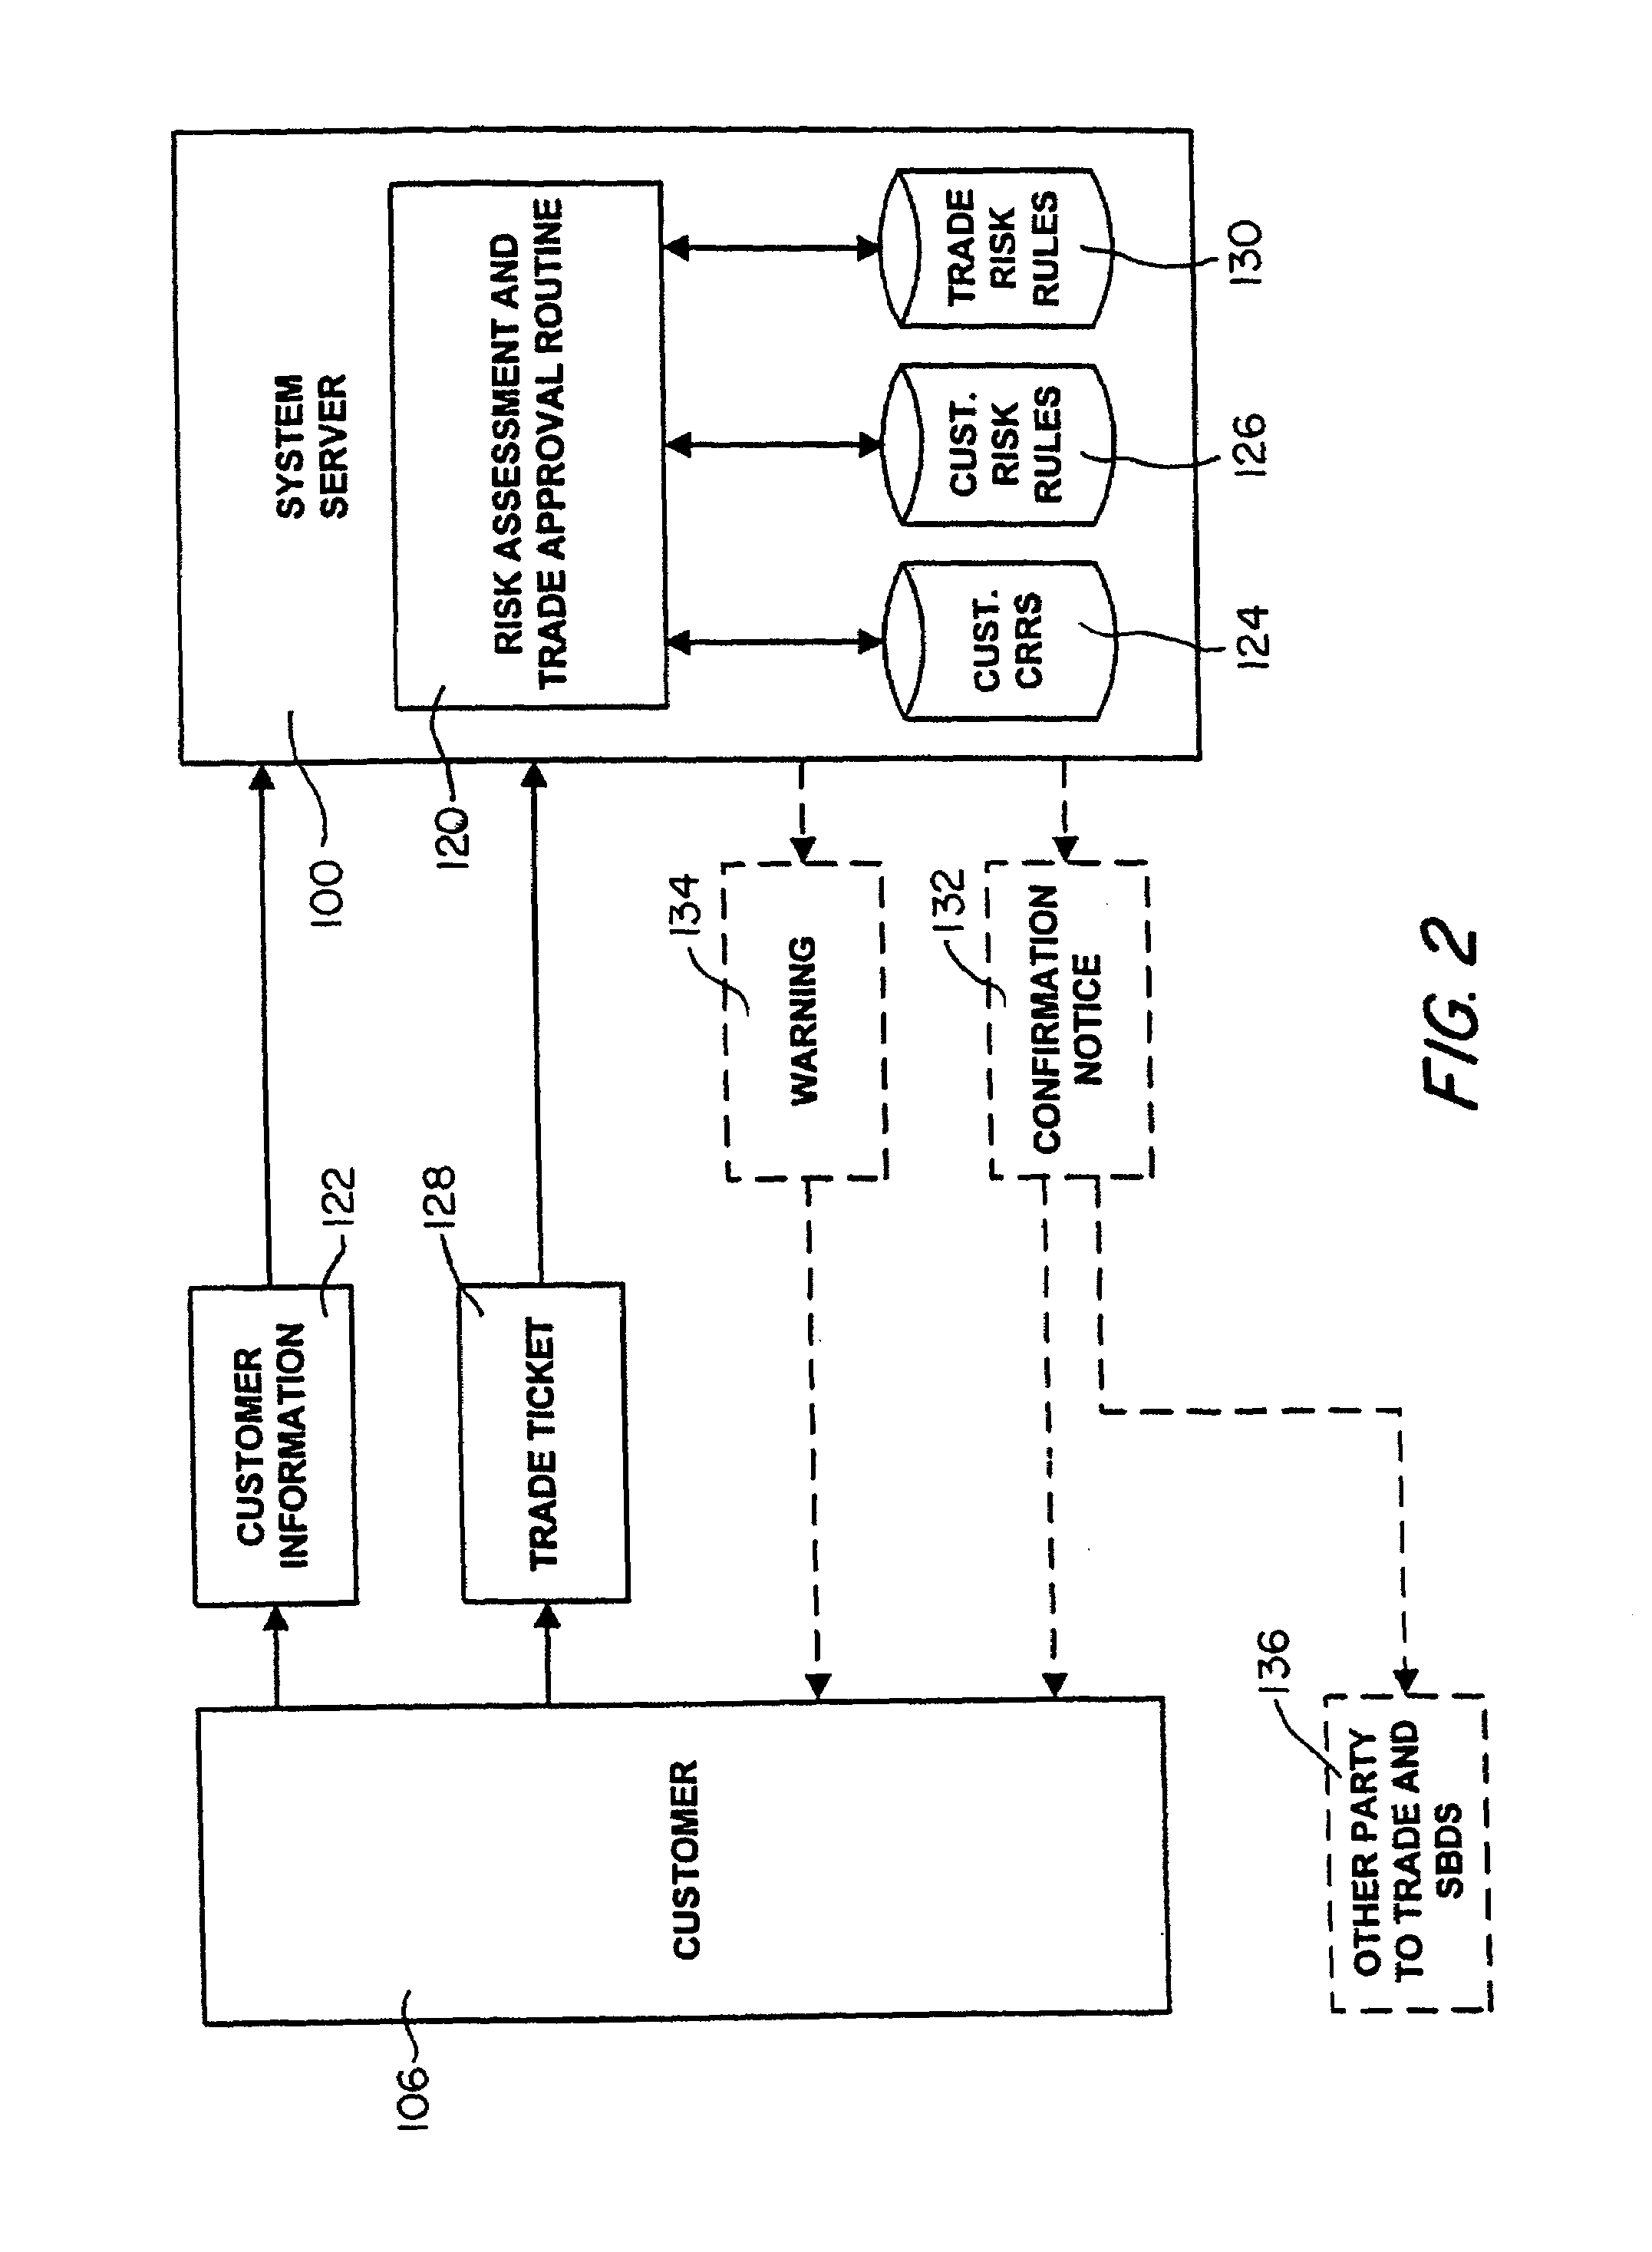 Network-based trading system and method